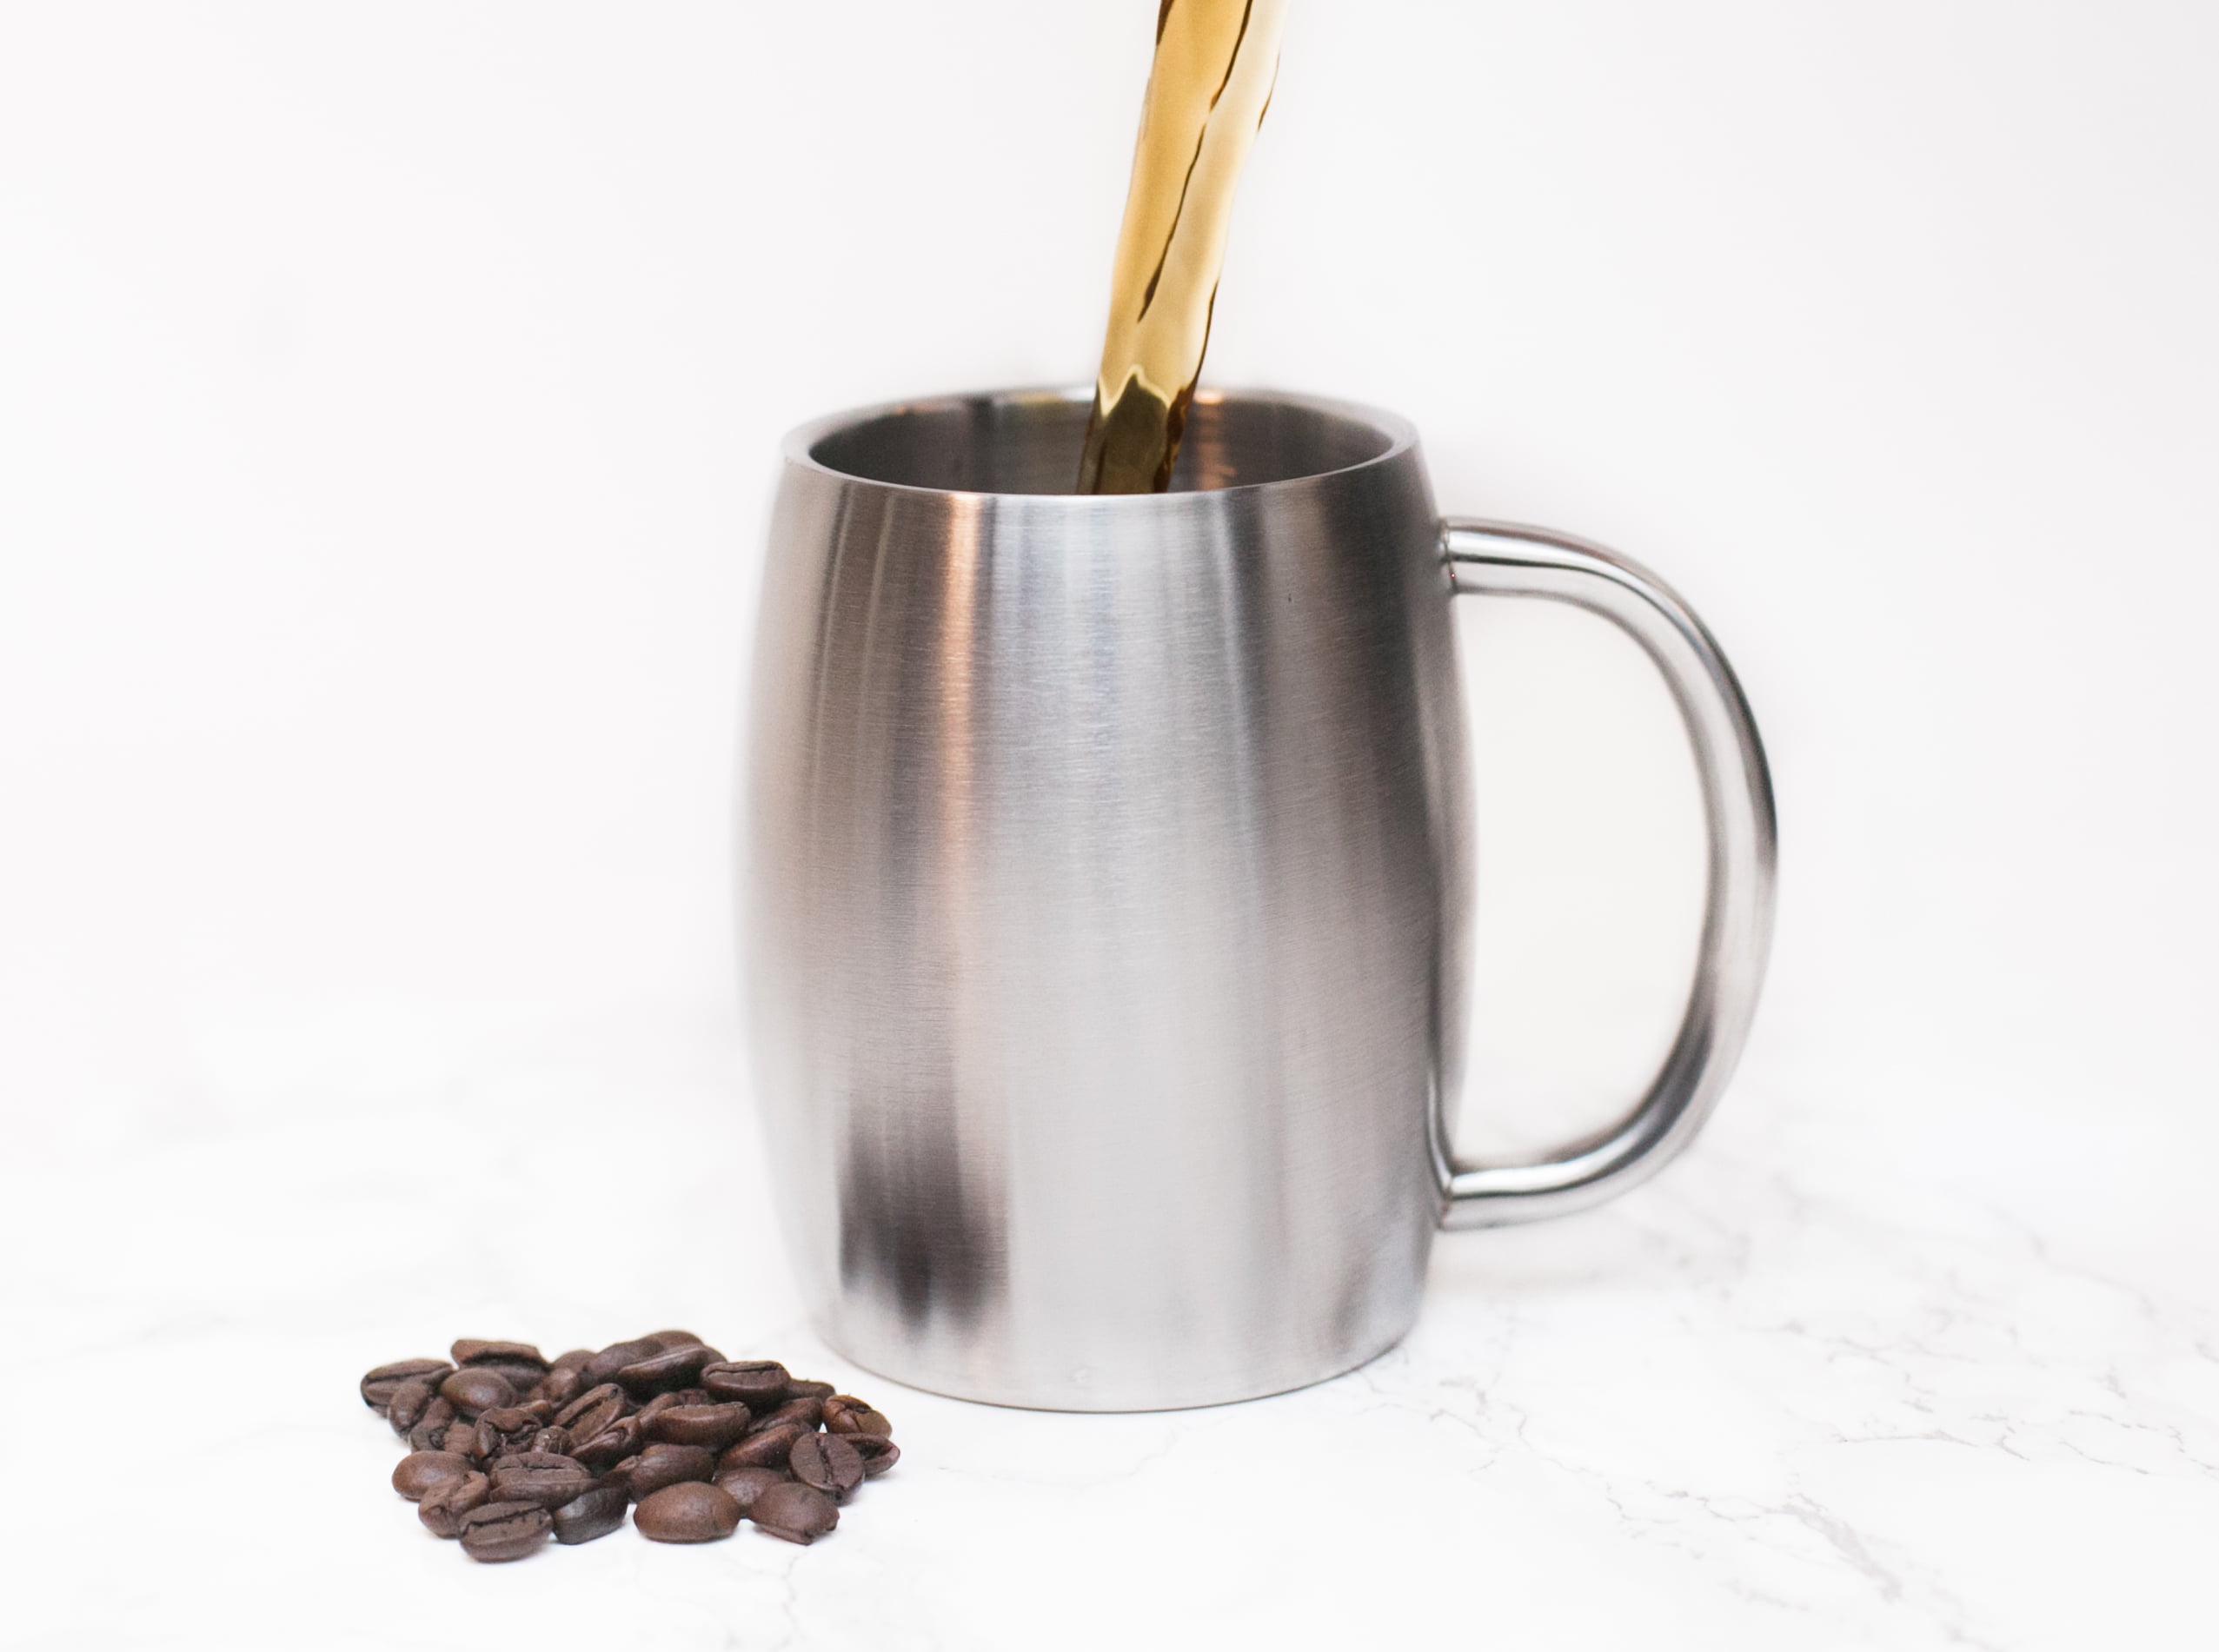 Insulated Stainless Steel Coffee Mug + Reviews, Crate & Barrel